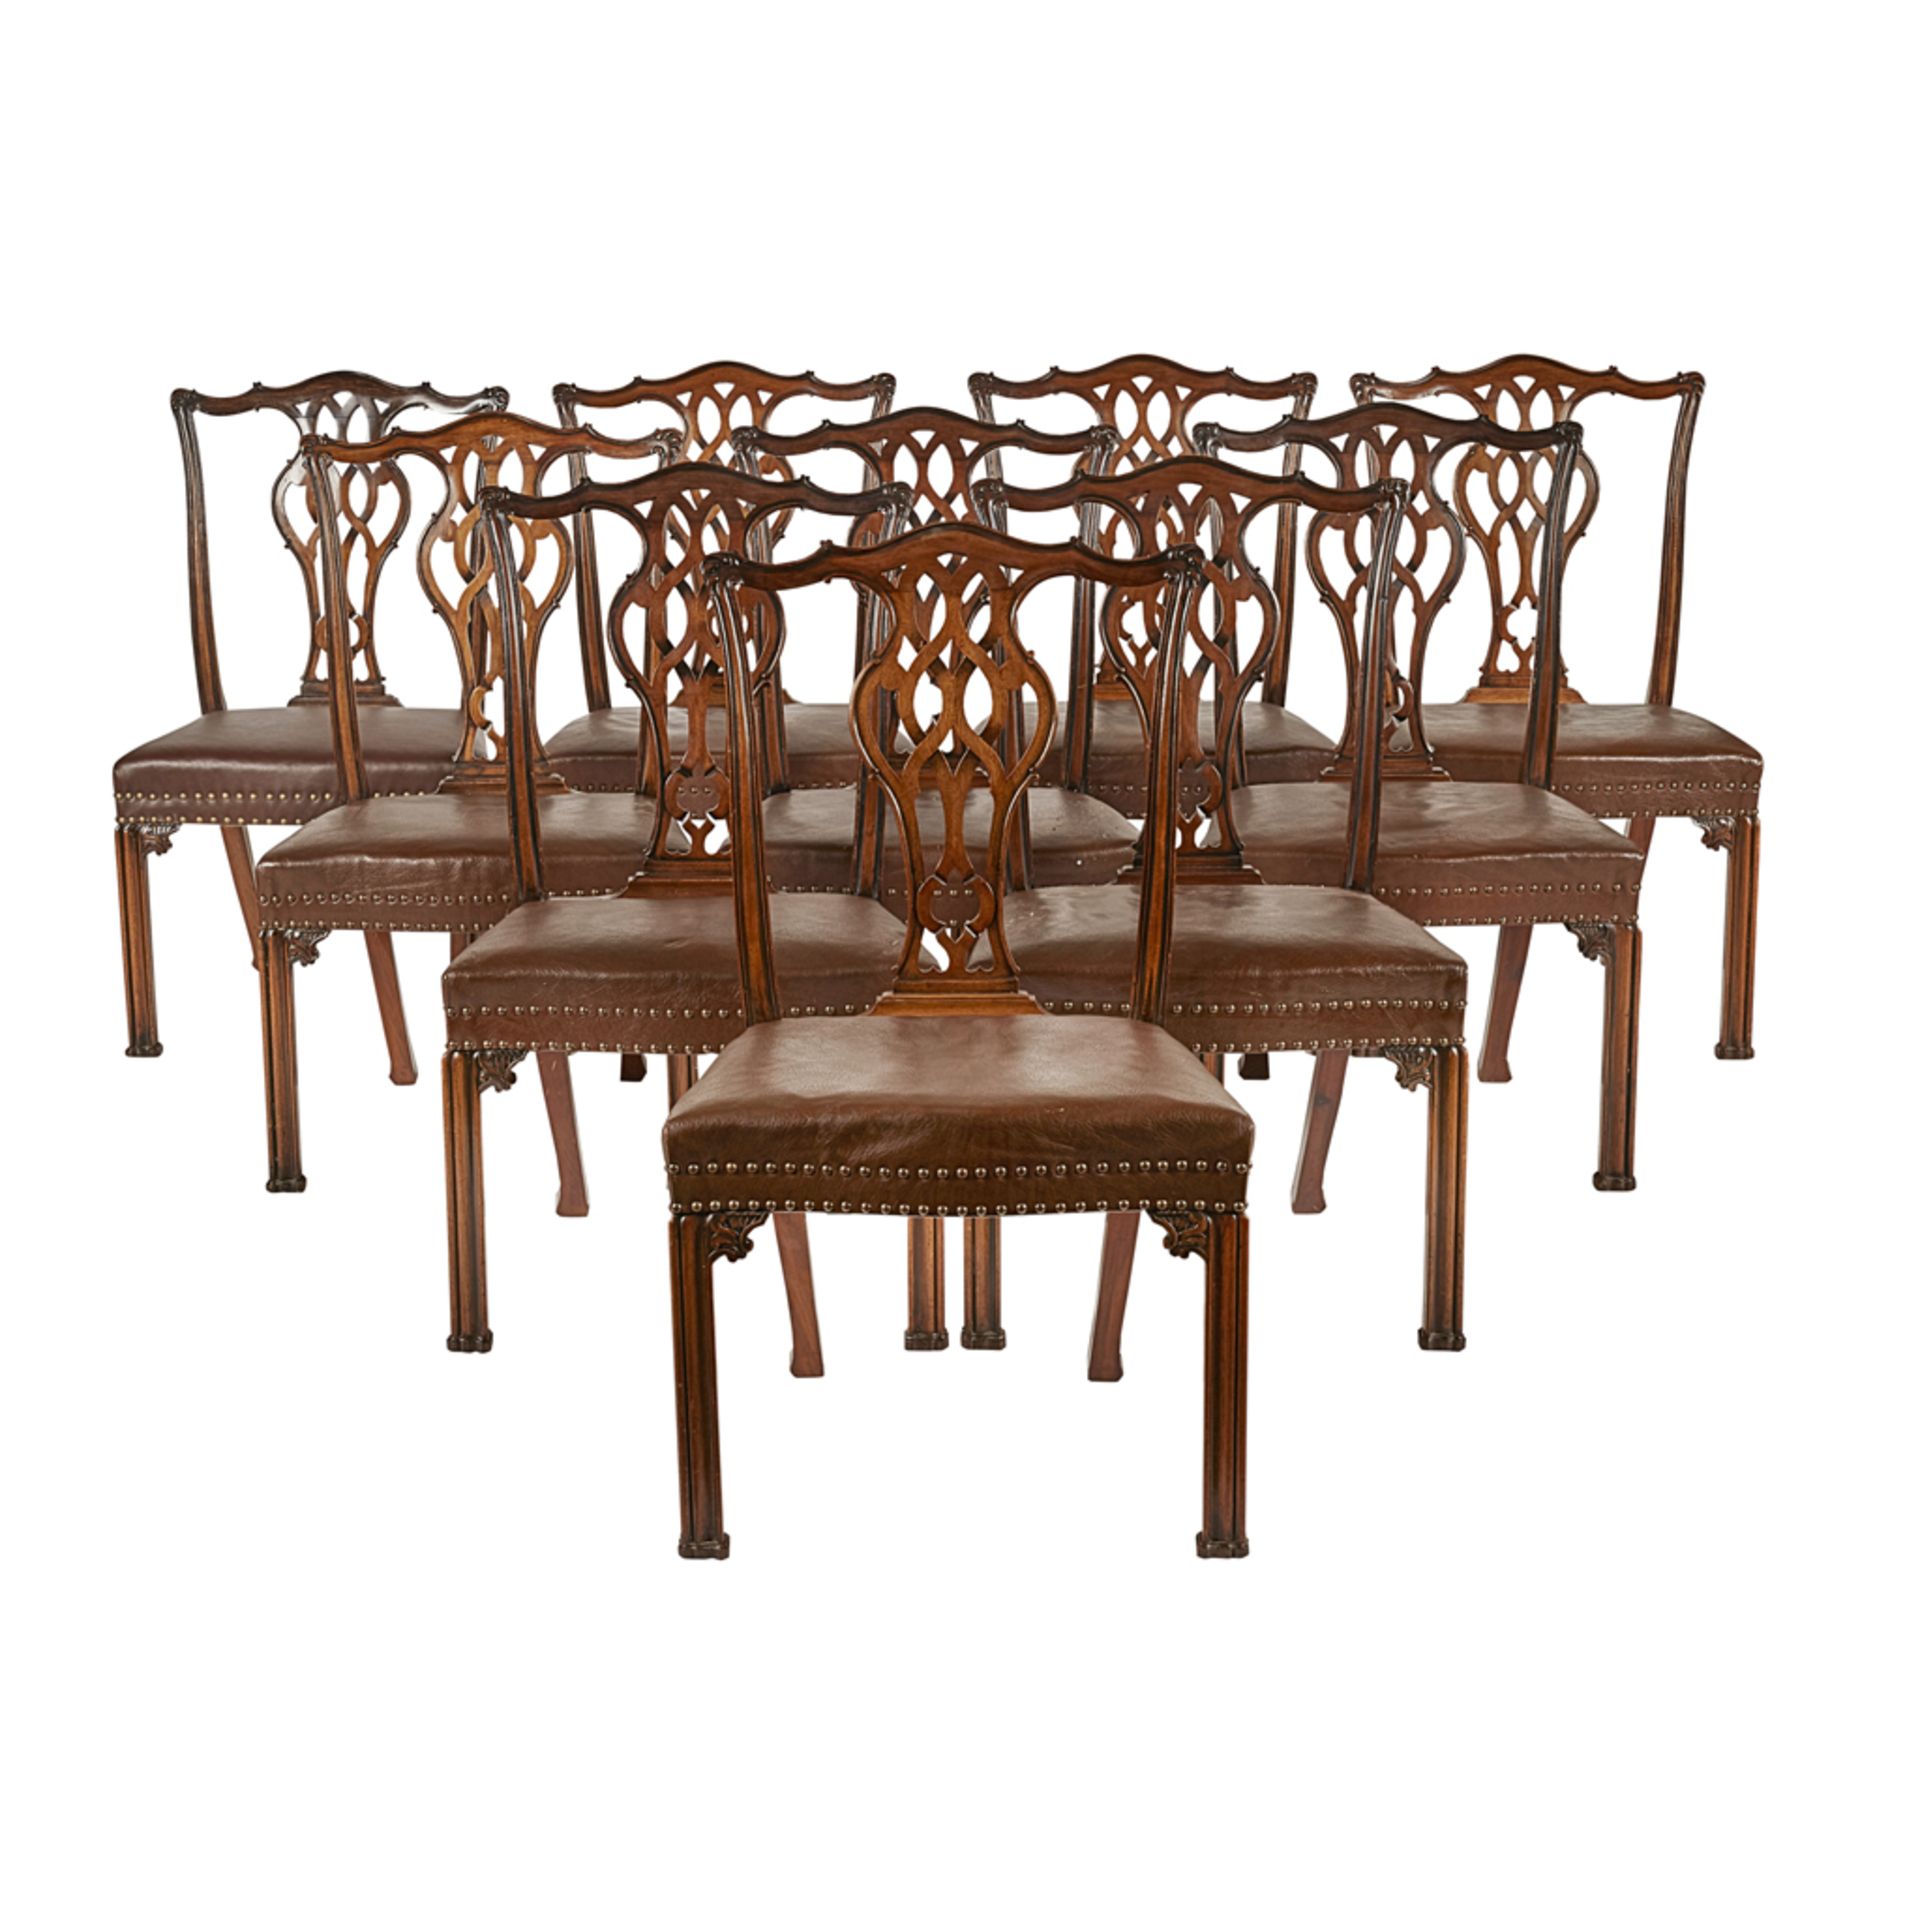 SET OF TWELVE GEORGIAN STYLE MAHOGANY DINING CHAIRS LATE 19TH CENTURY comprising ten side chairs and